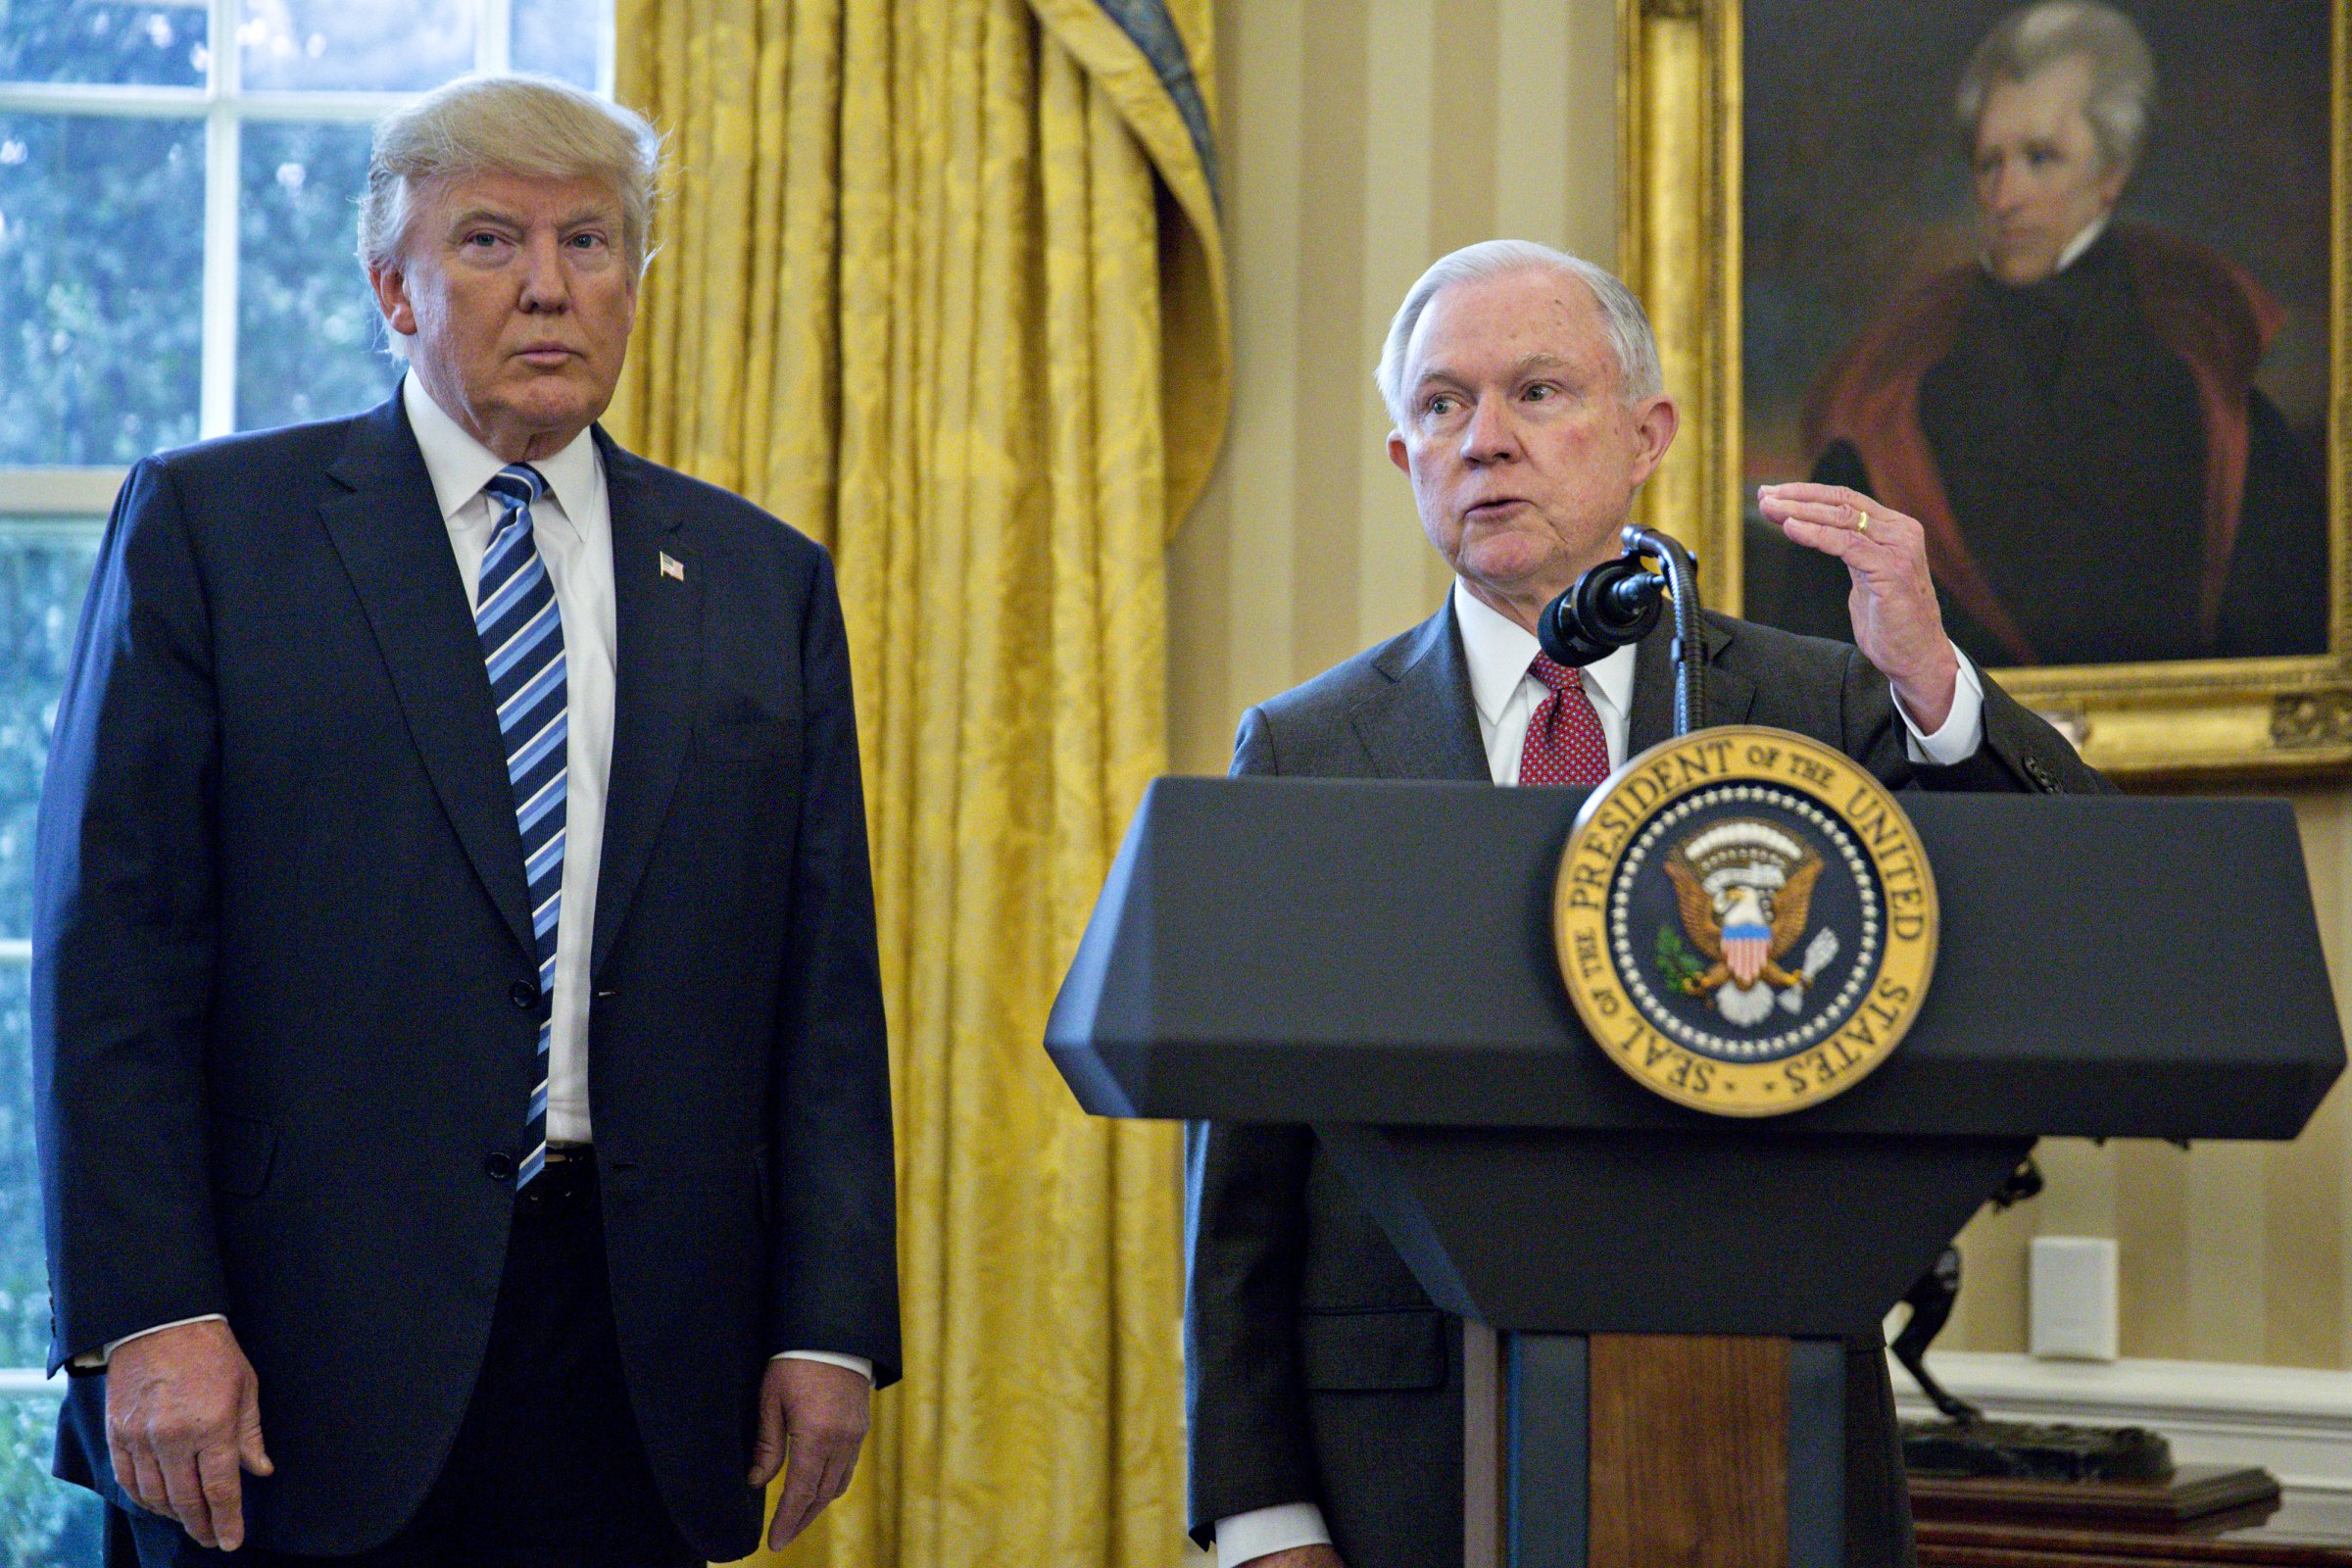 Jeff Sessions Is Sworn In As U.S. Attorney General